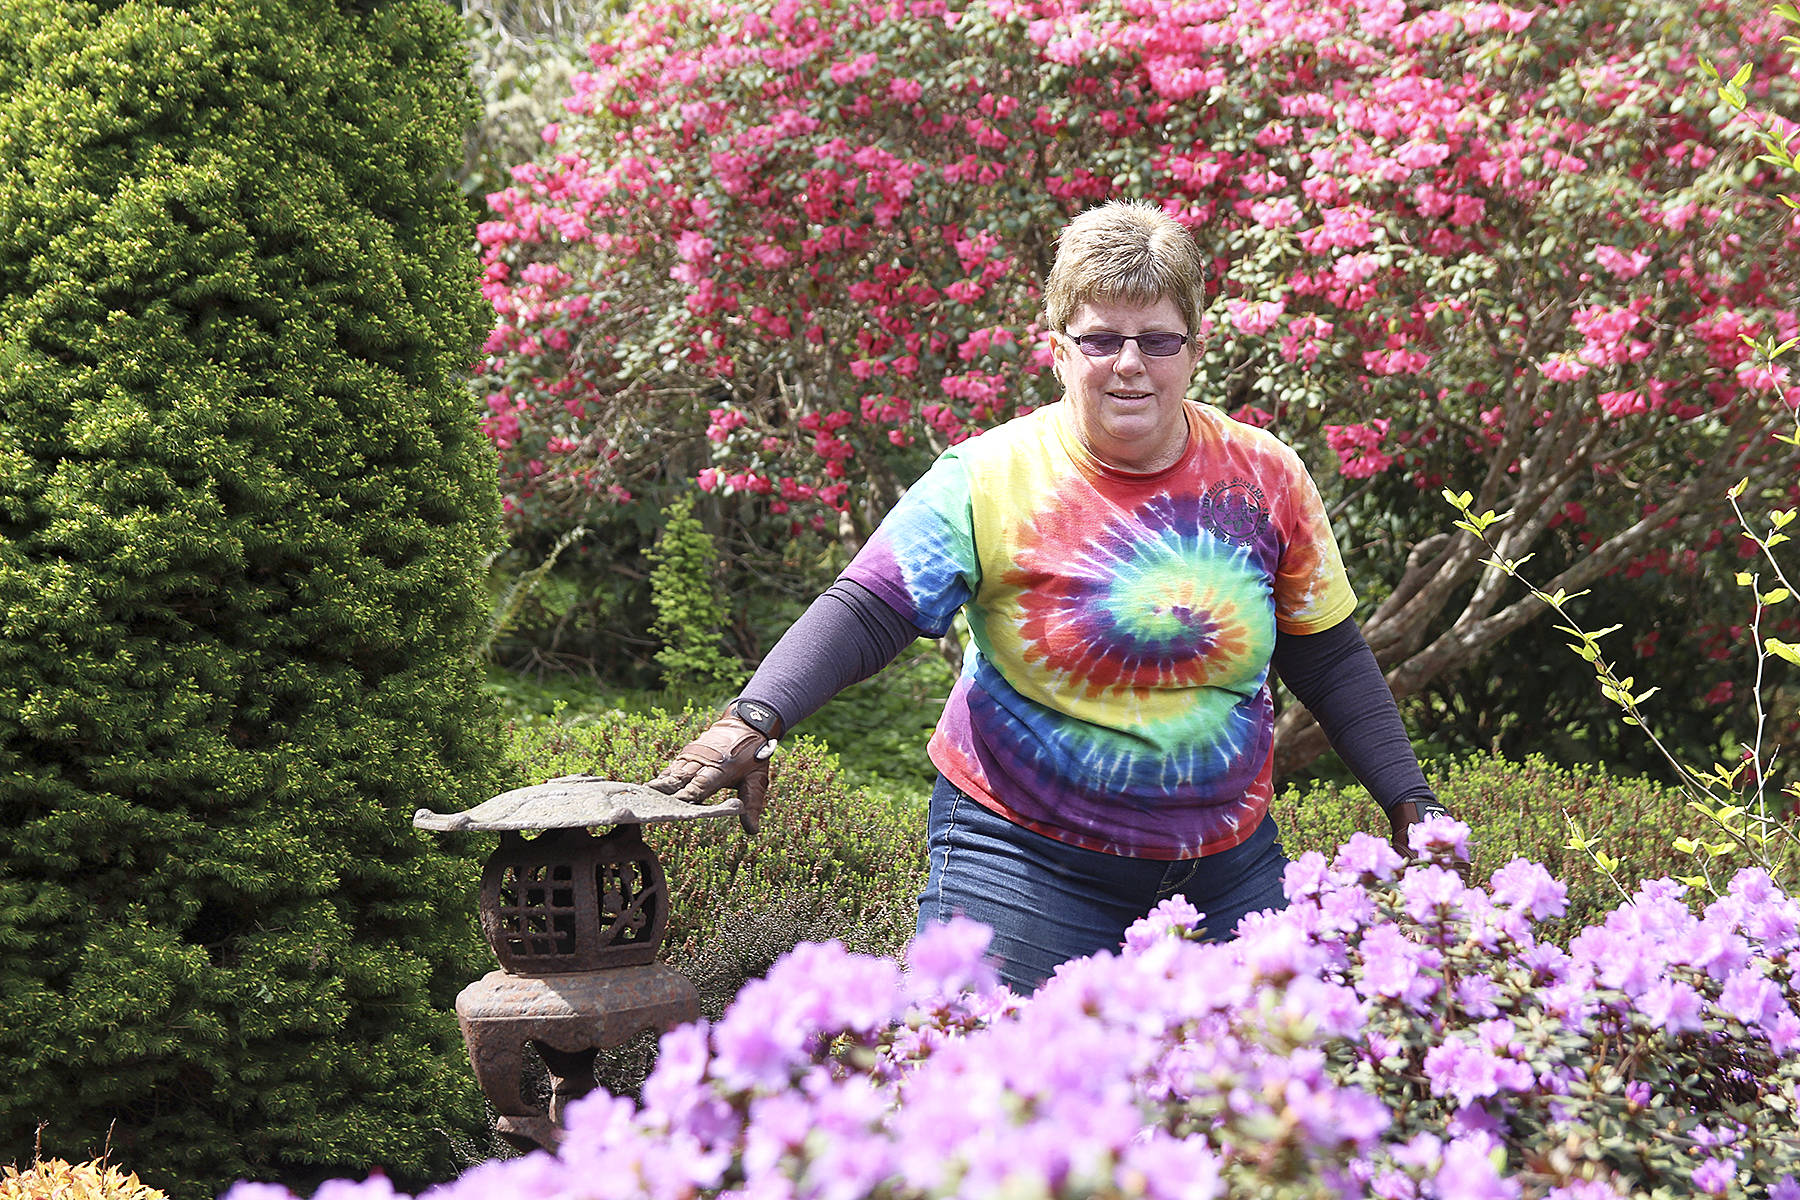 Volunteer Cheri Anderson admires a rhododendron impeditum. (Photos by Laura Guido/Whidbey News Group)